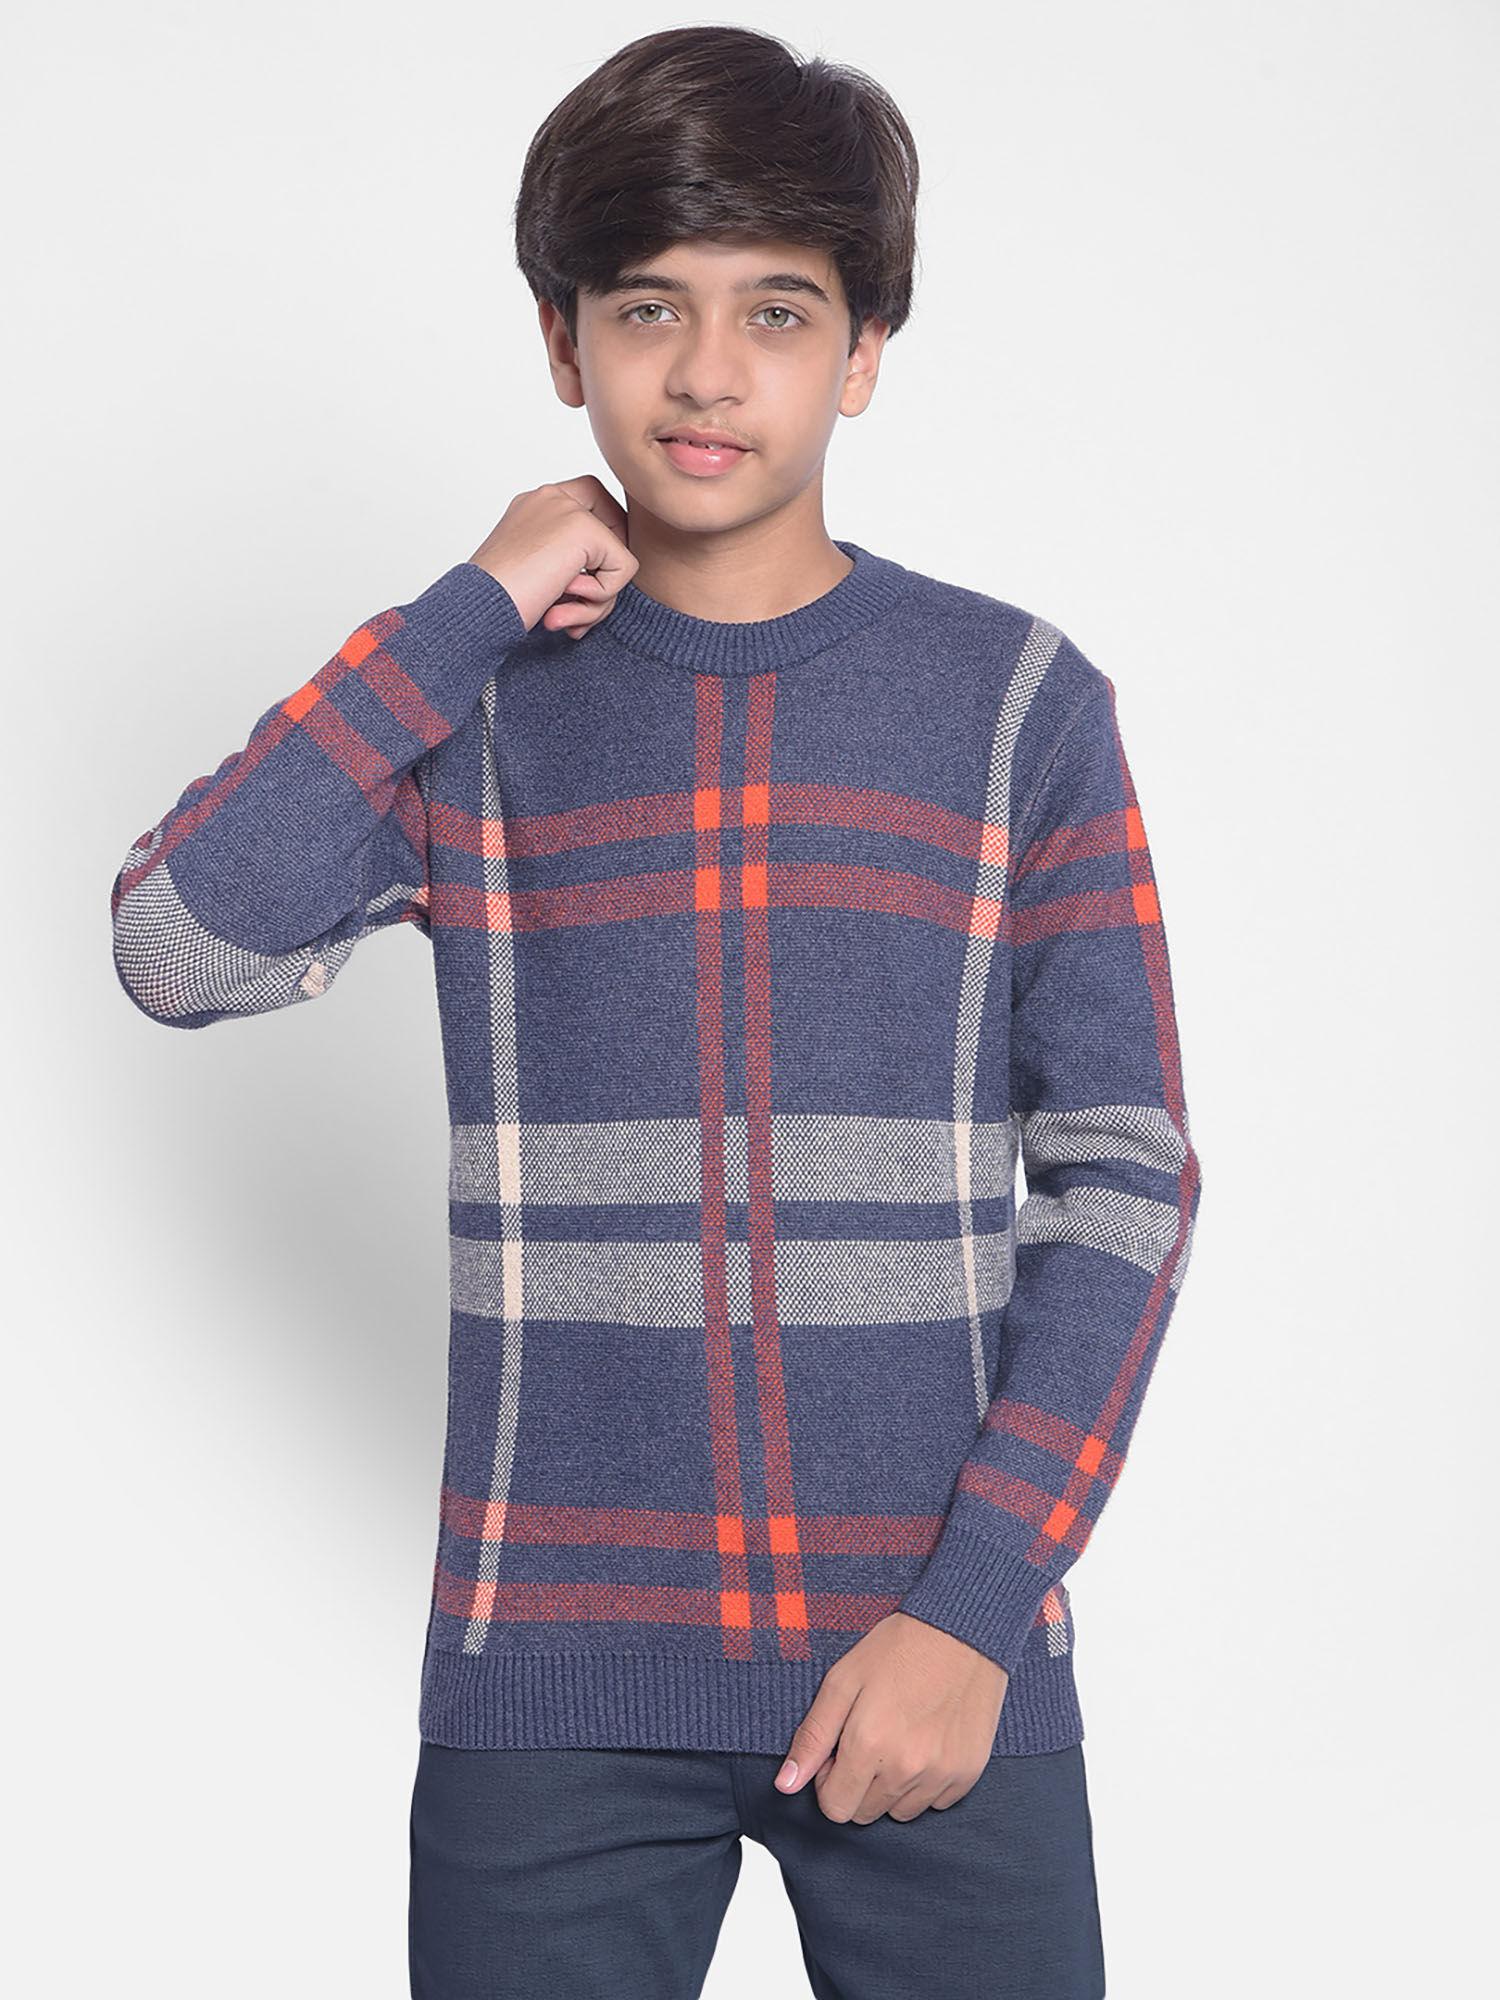 boys-navy-blue-checked-sweater